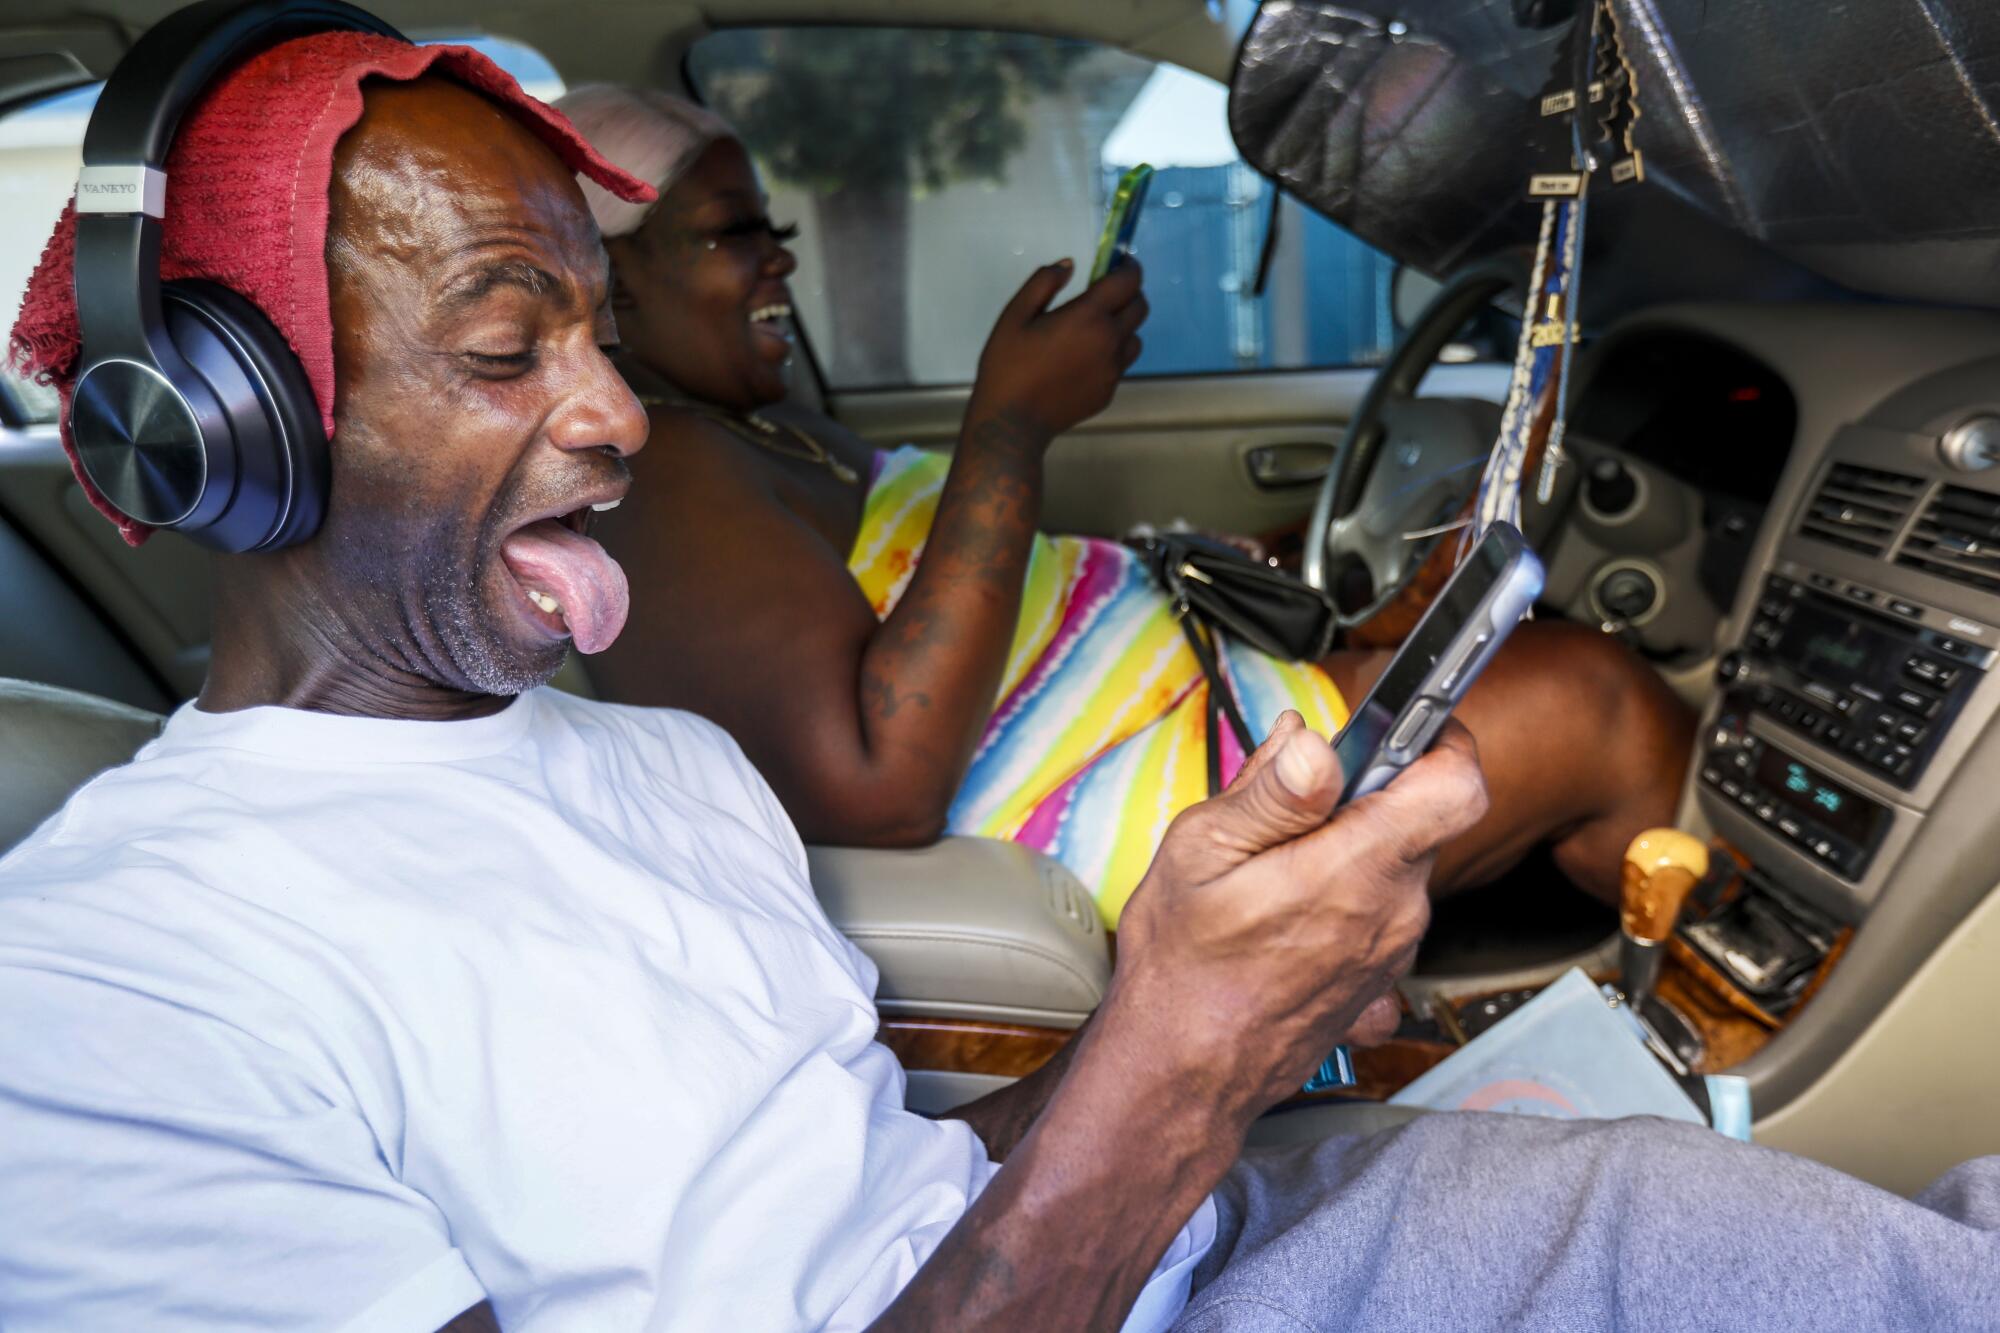 Donald Winston shares a laugh with Shalisa White outside the homeless shelter where he has lived since December.